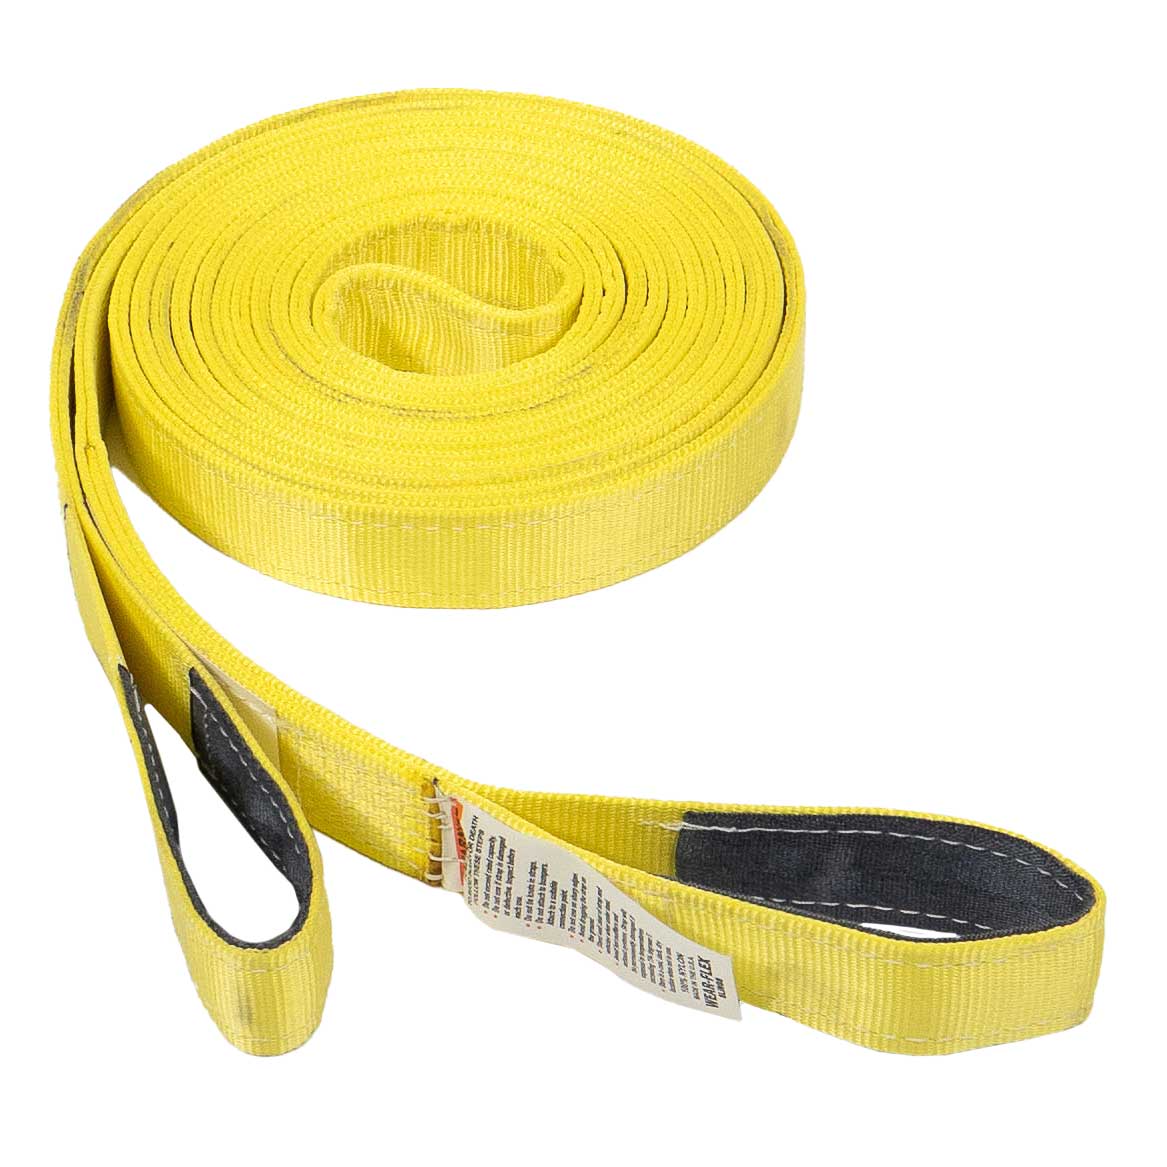 2 x 20' Recovery Strap with Reinforced Cordura Eyes - 2 Ply | 16,000 WLL